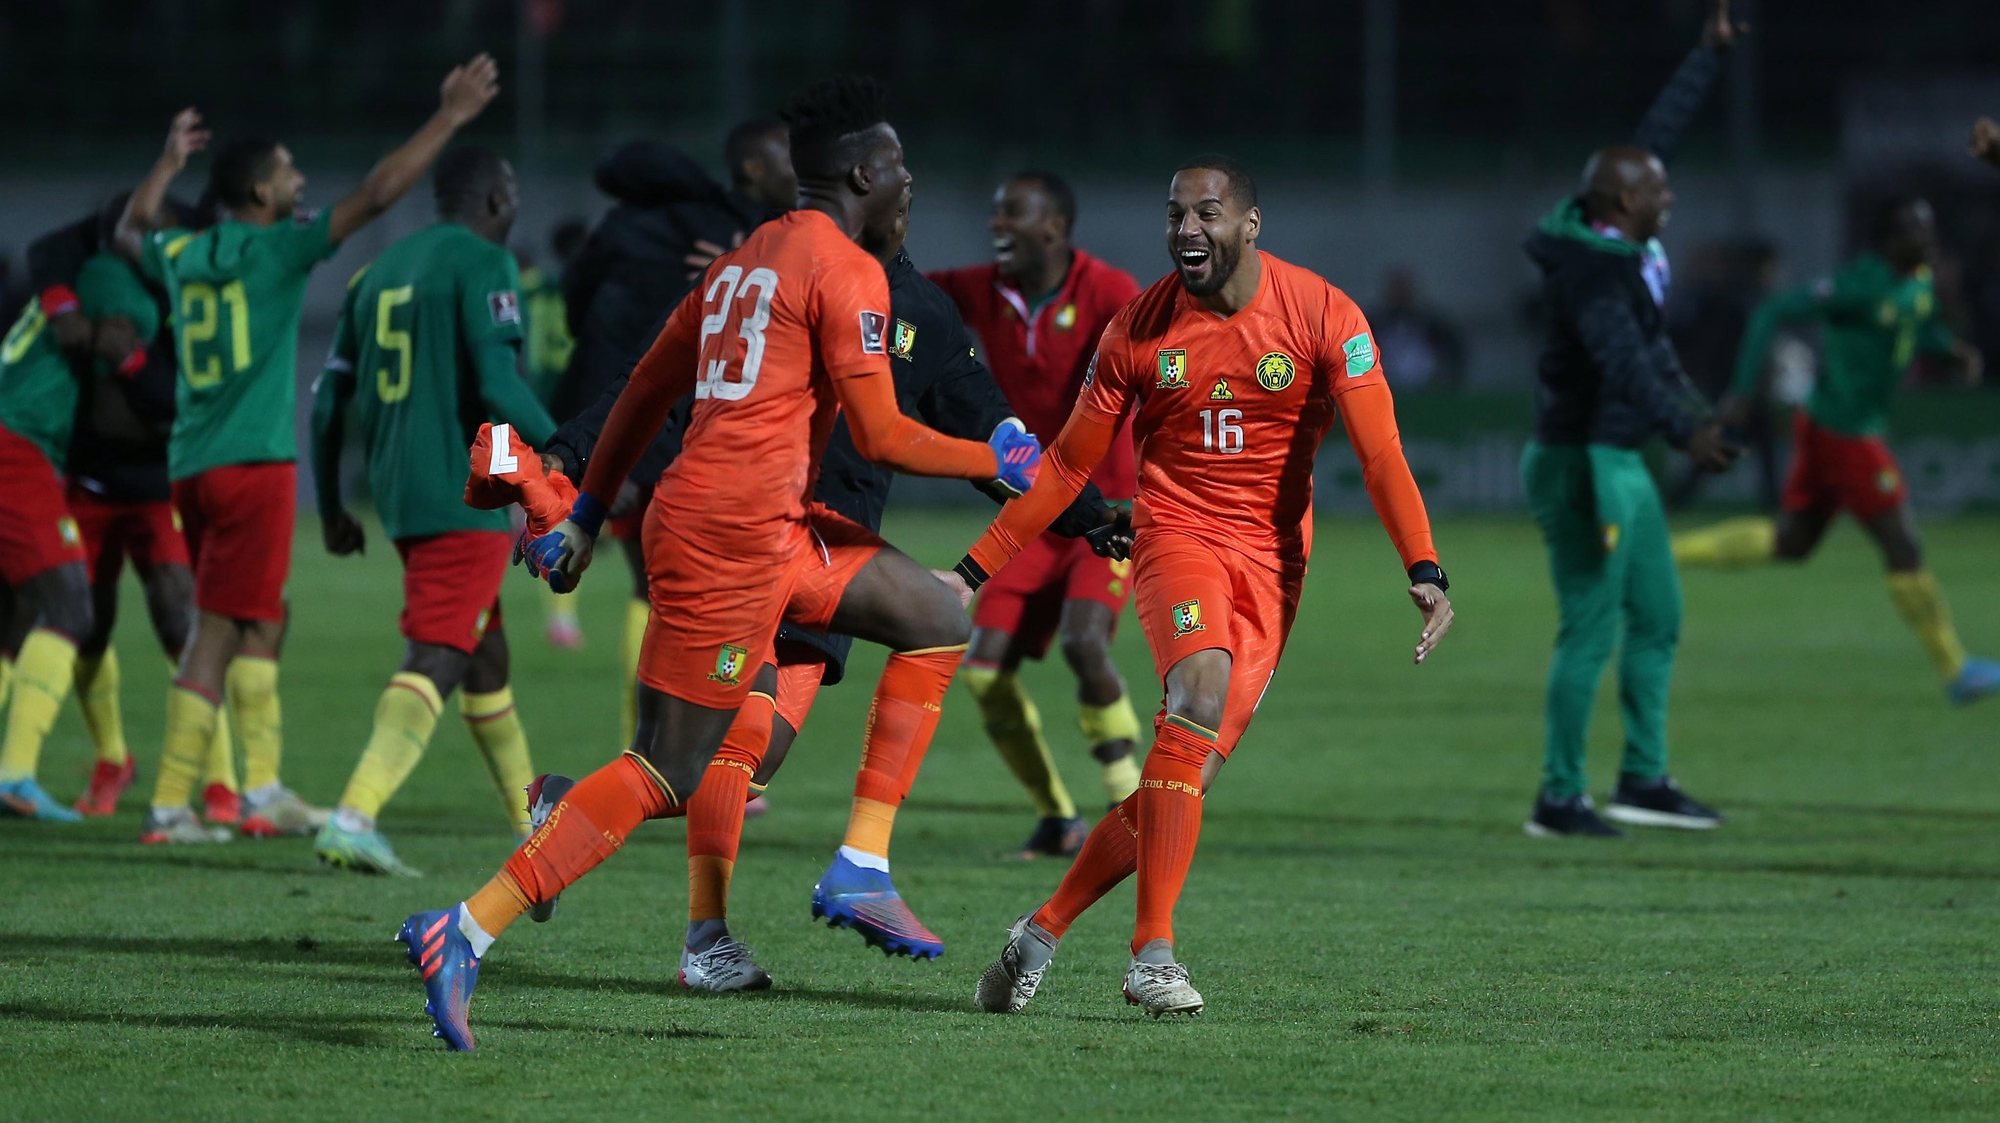 epa09859622 Cameroon players celebrate after beating Algeria to reach the 2022 FIFA World Cup  during the FIFA Qatar 2022 World Cup Africa qualifiers match between Algeria and Cameroon at Mustapha Tchaker Stadium de Blida, Algeria, 29 March 2022.  EPA/STR